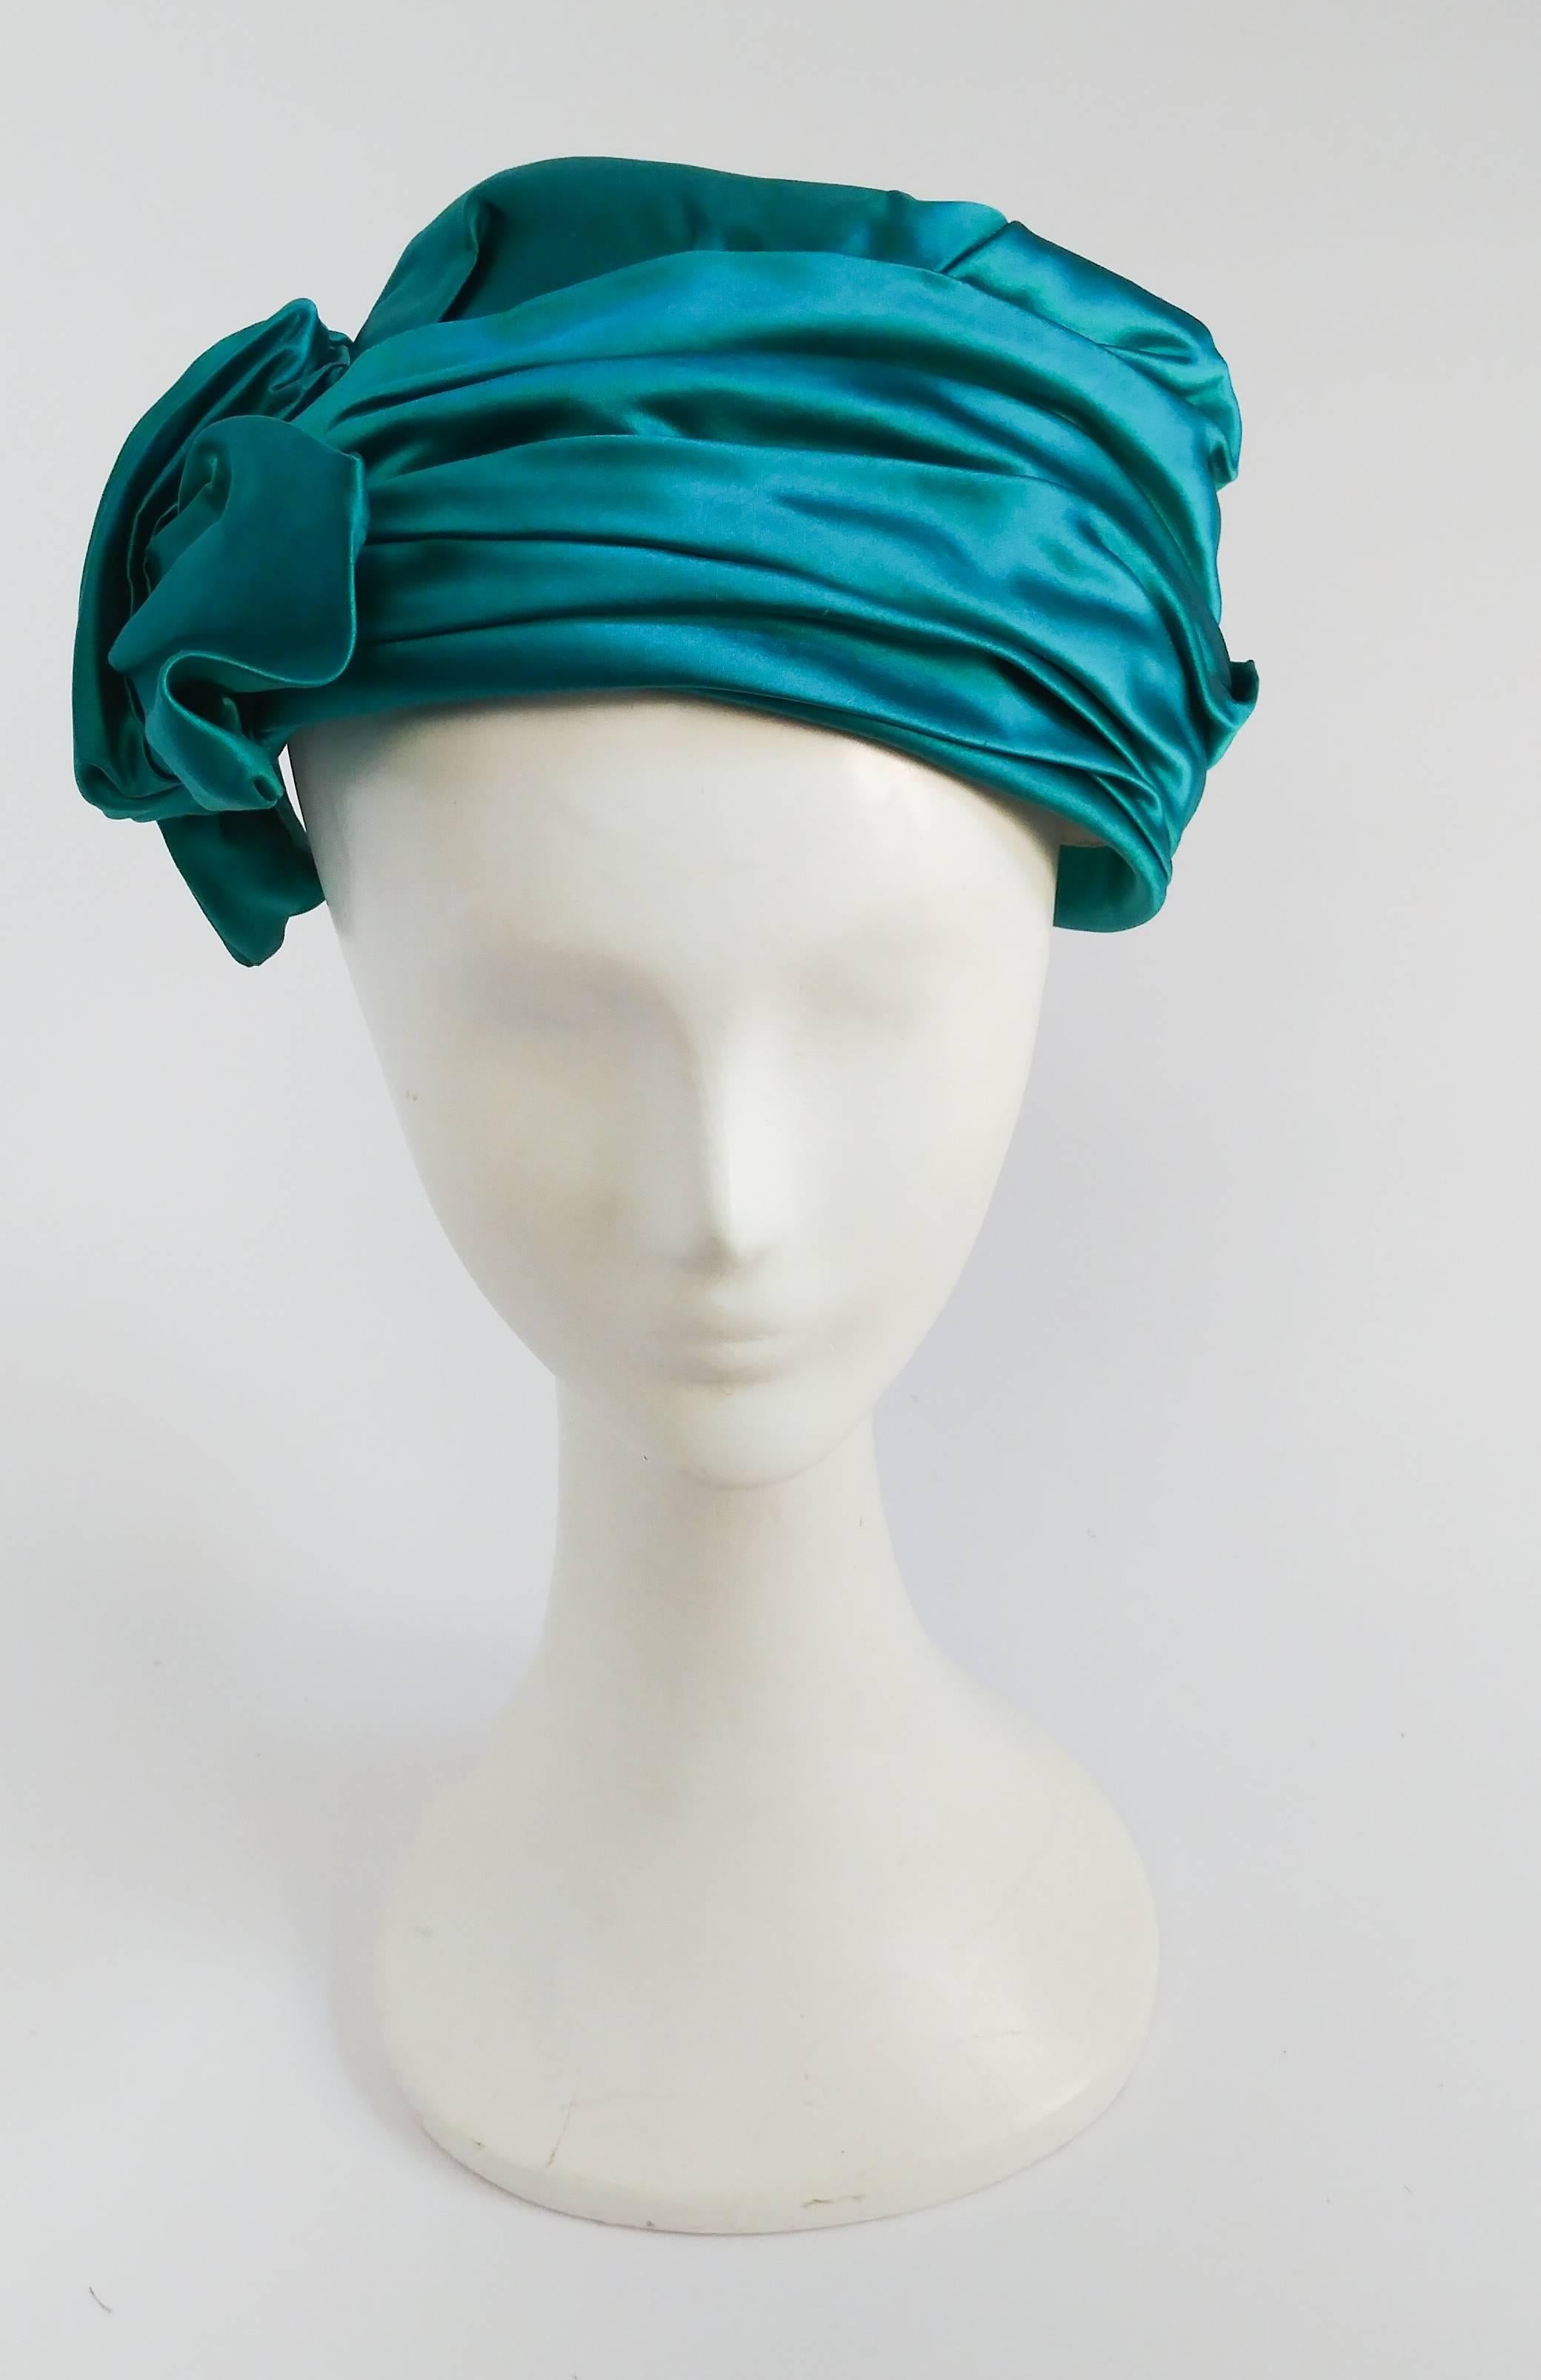 1960s Green Turban Hat w/ Side Bow. Beautifully draped 60s hat finished on the side with eye-catching and adorable ruched bow.